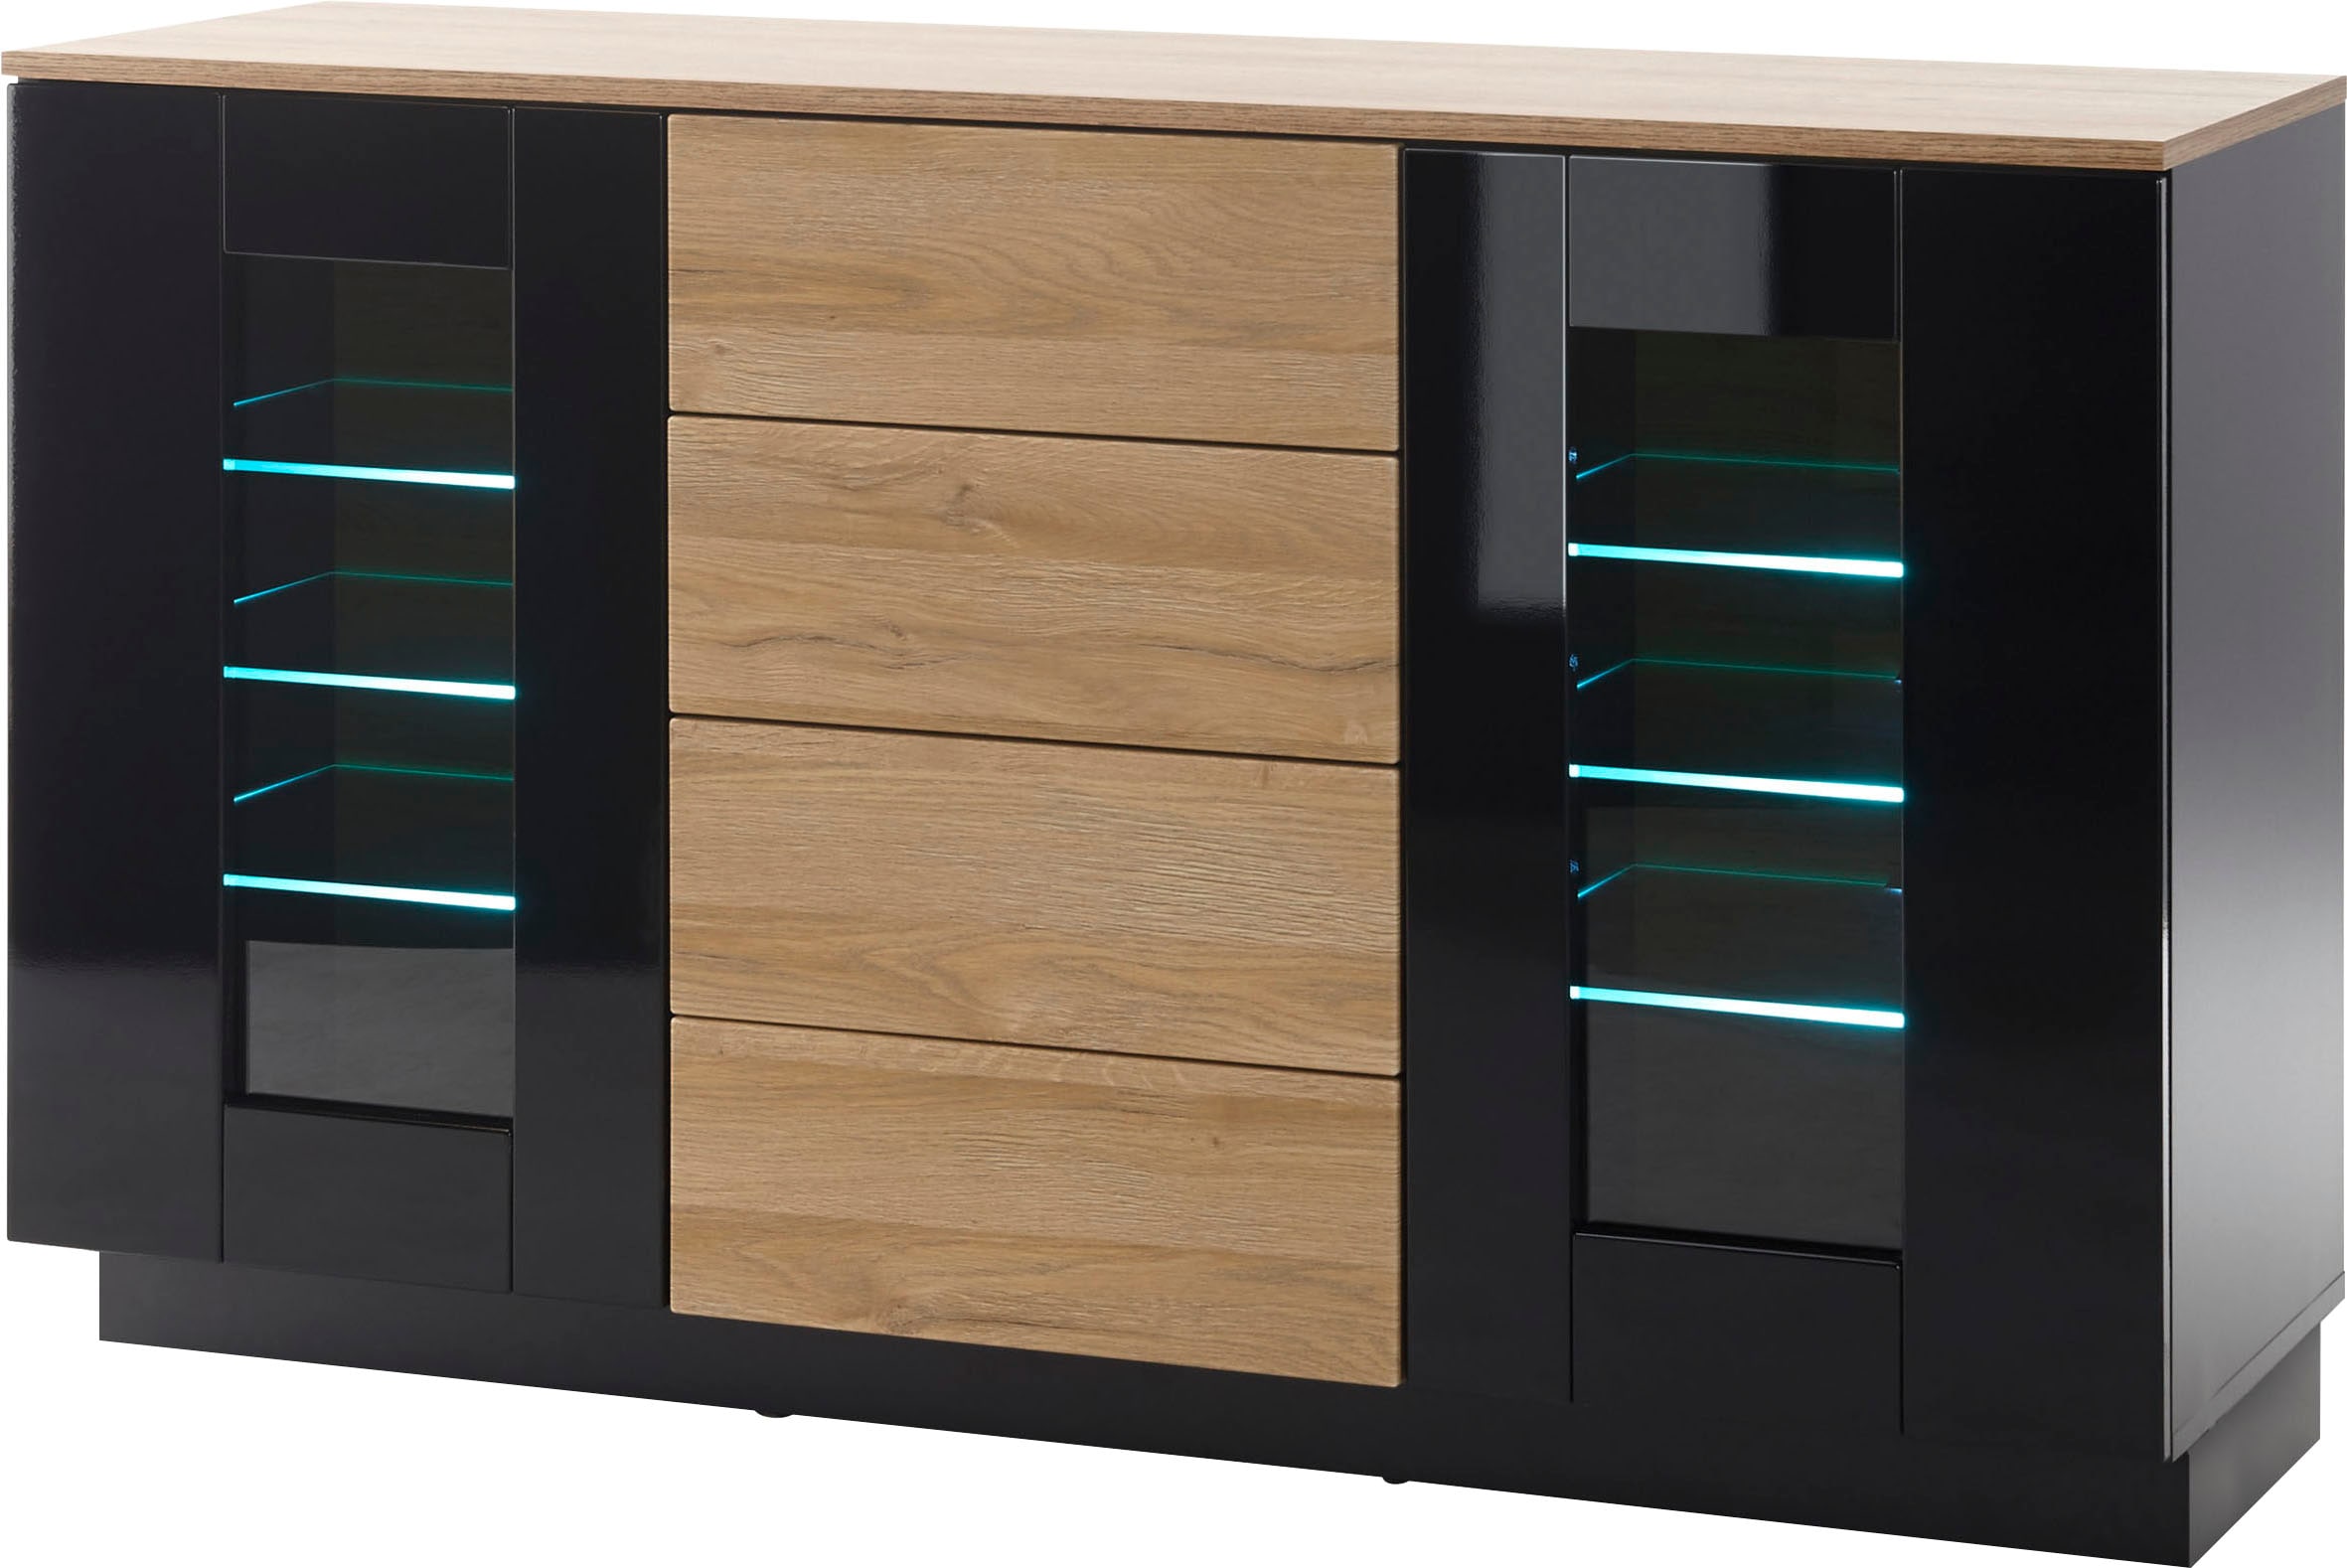 Sideboard Style kaufen Breite online ca. cm of 136 »Cayman«, Places